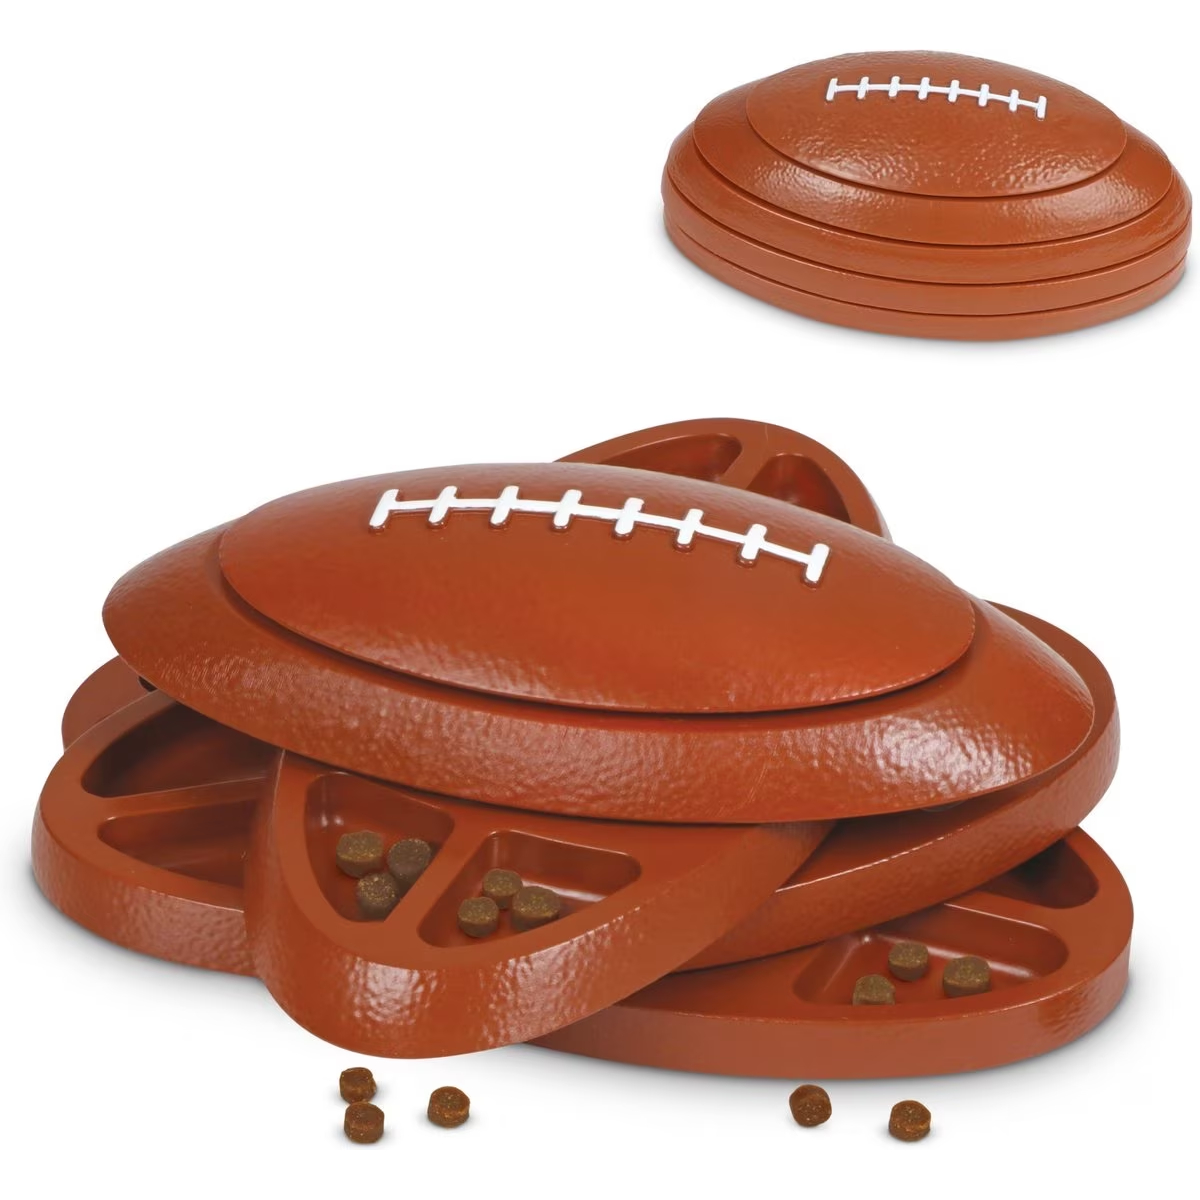 Brightkins Touchdown Time! Treat Puzzle